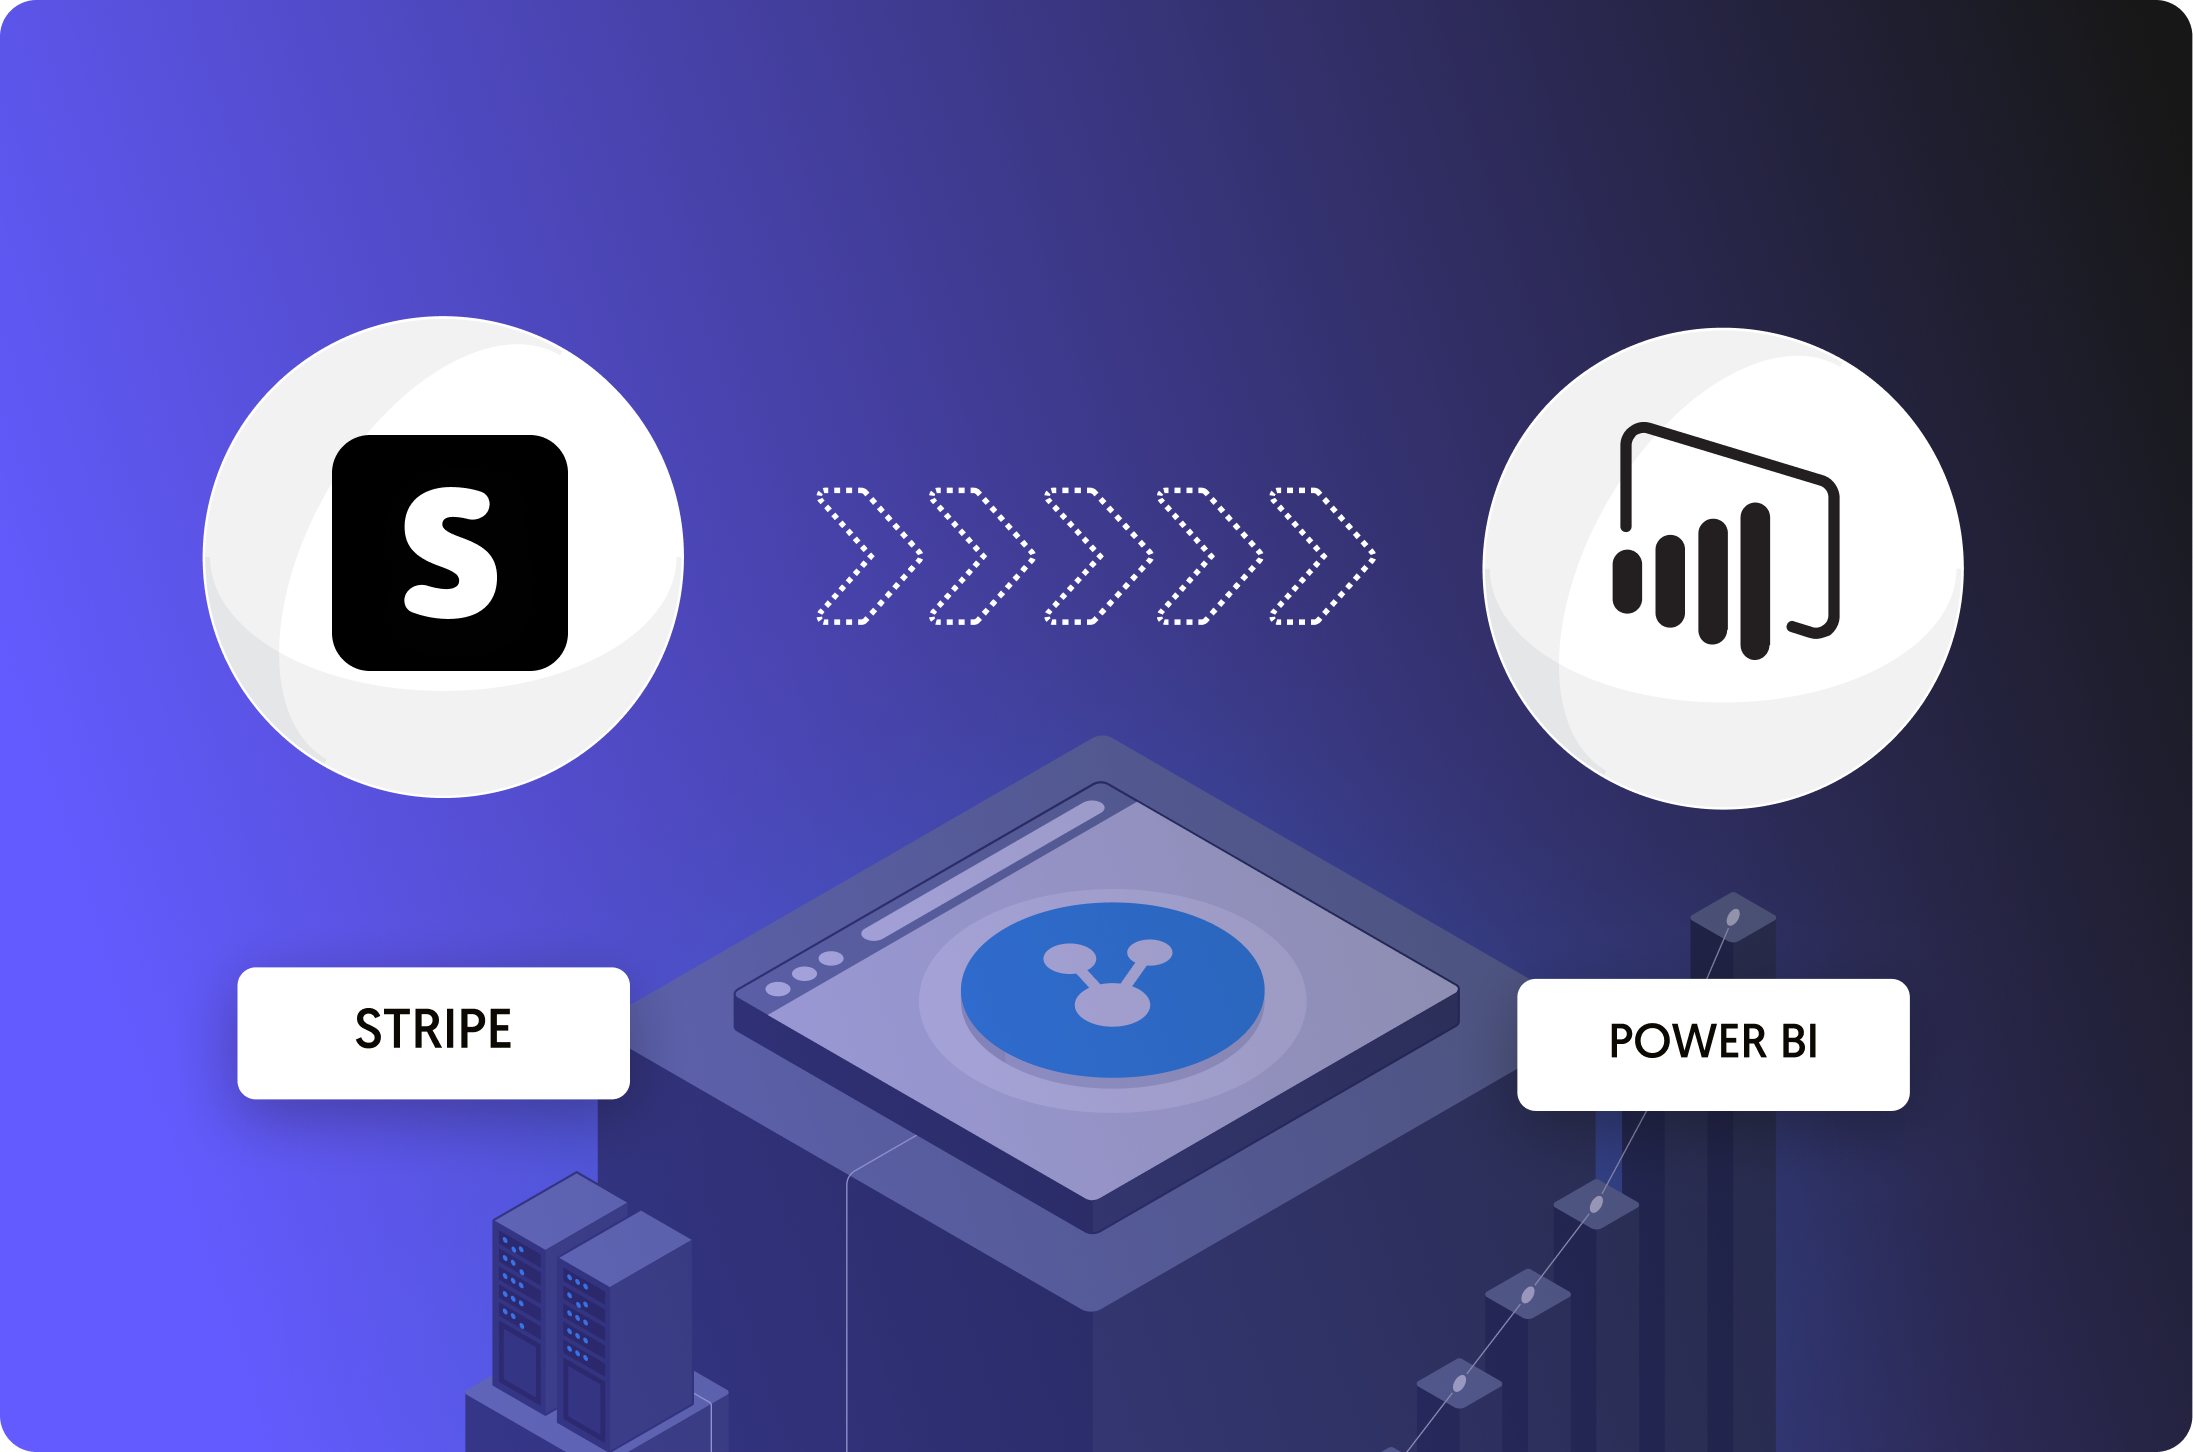 How to Connect Stripe to Power BI: Direct vs. Dataddo